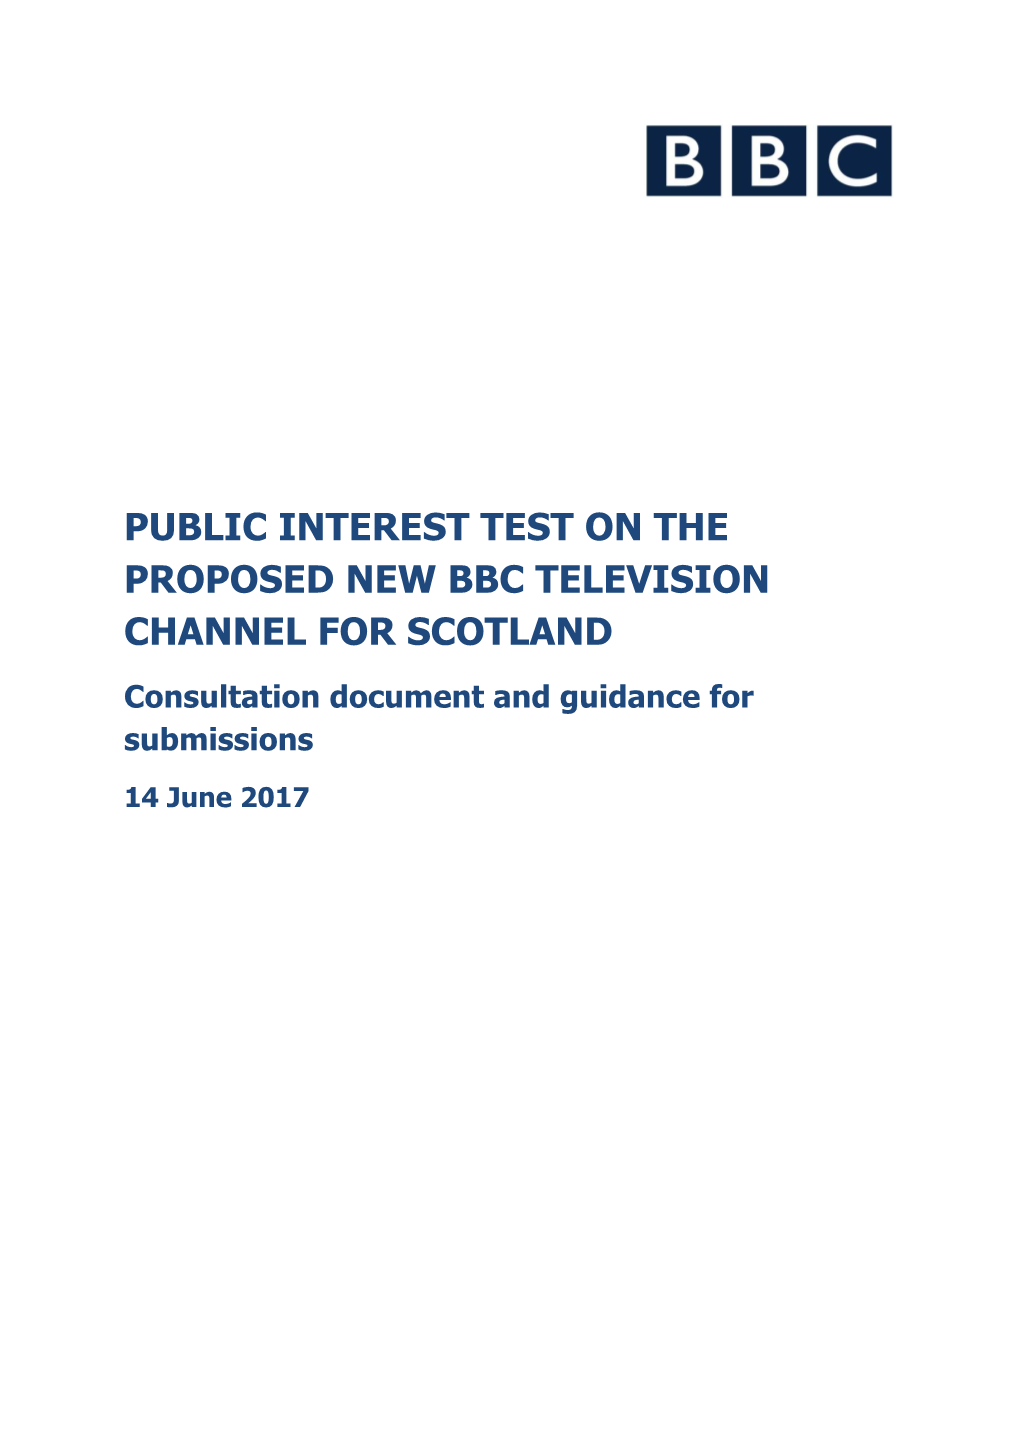 PUBLIC INTEREST TEST on the PROPOSED NEW BBC TELEVISION CHANNEL for SCOTLAND Consultation Document and Guidance for Submissions